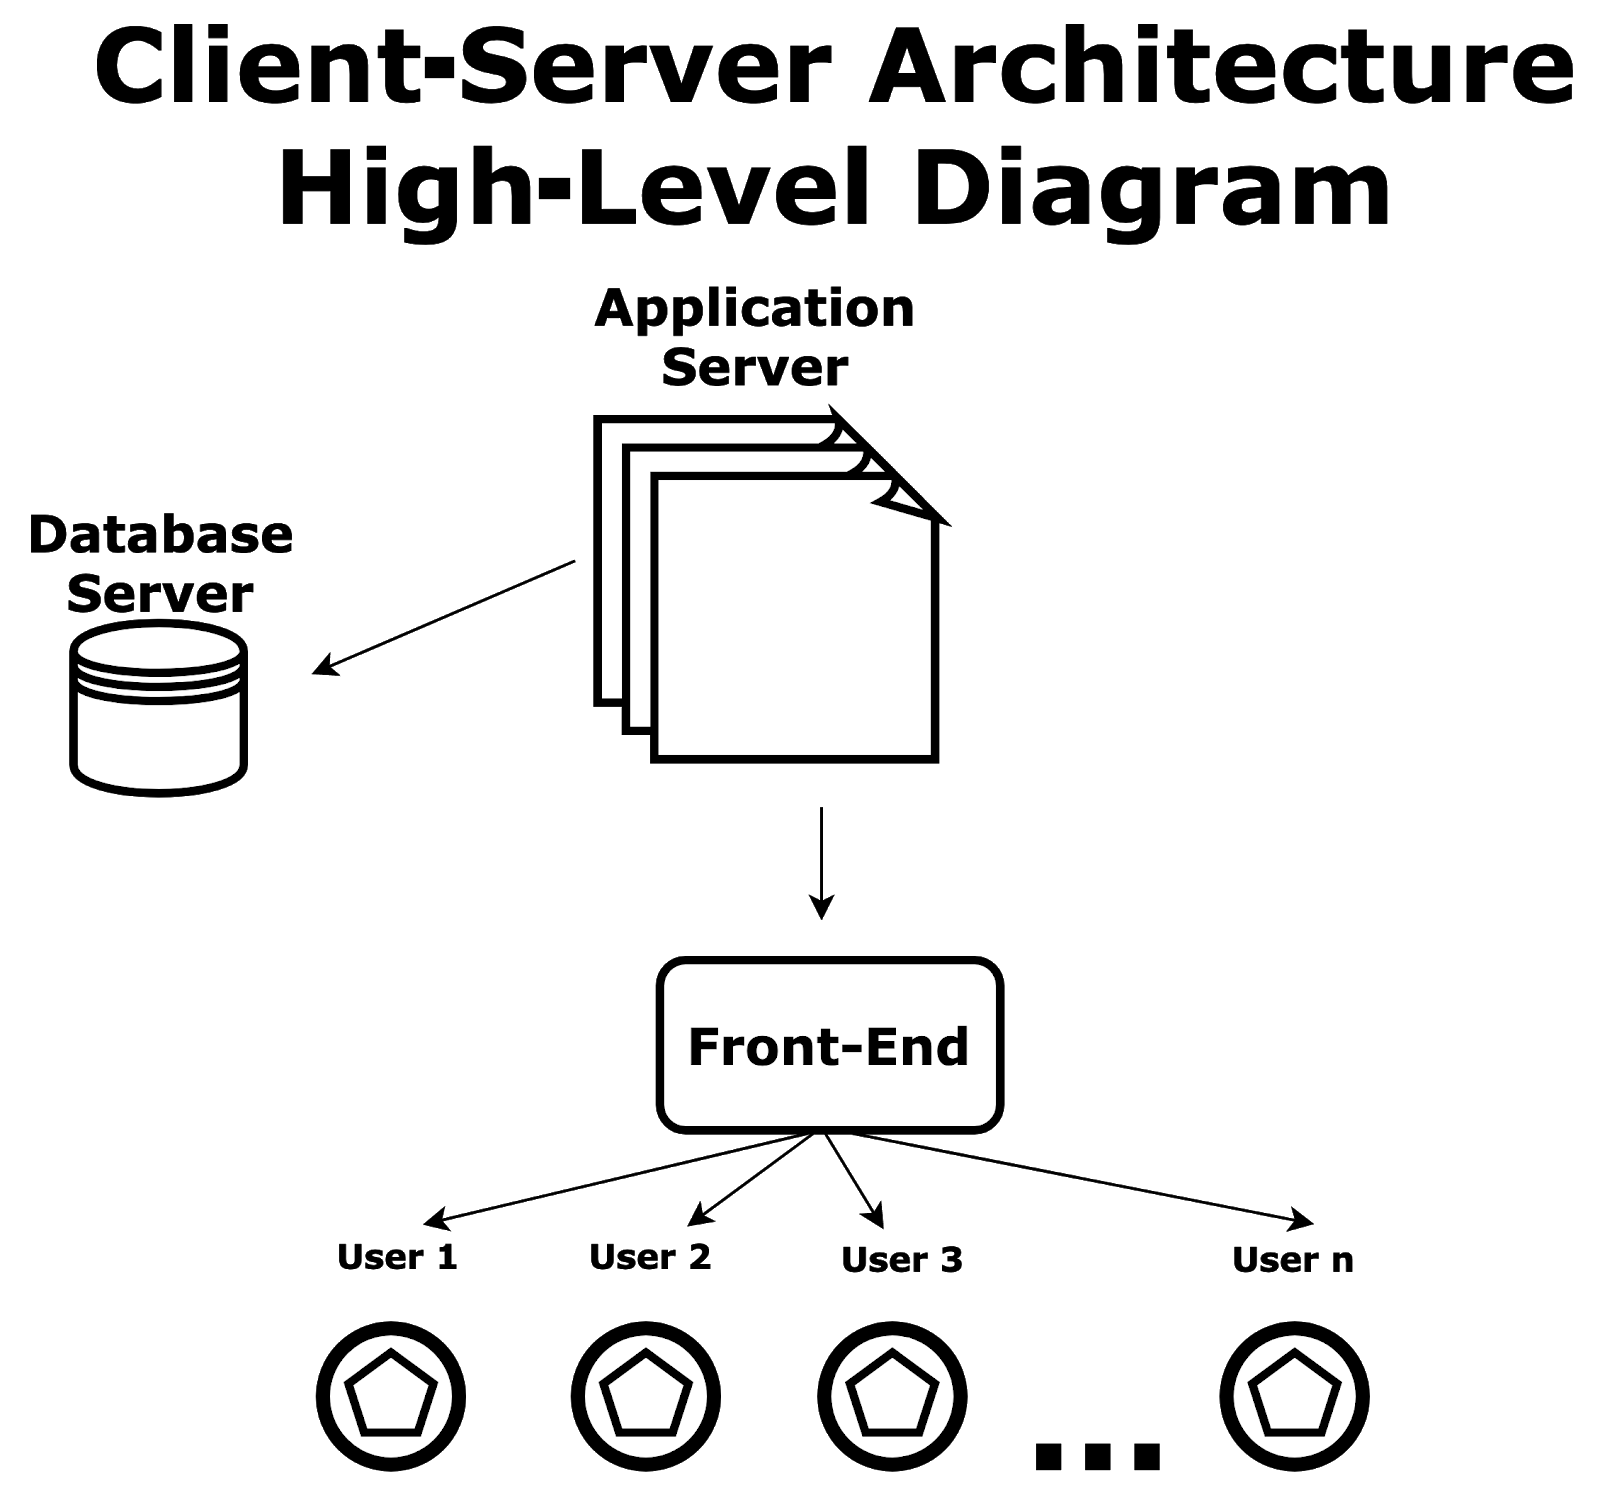 An application server is in the middle.  An arrow to the left of it points to a database server.  An arrow below it points to a box labeled